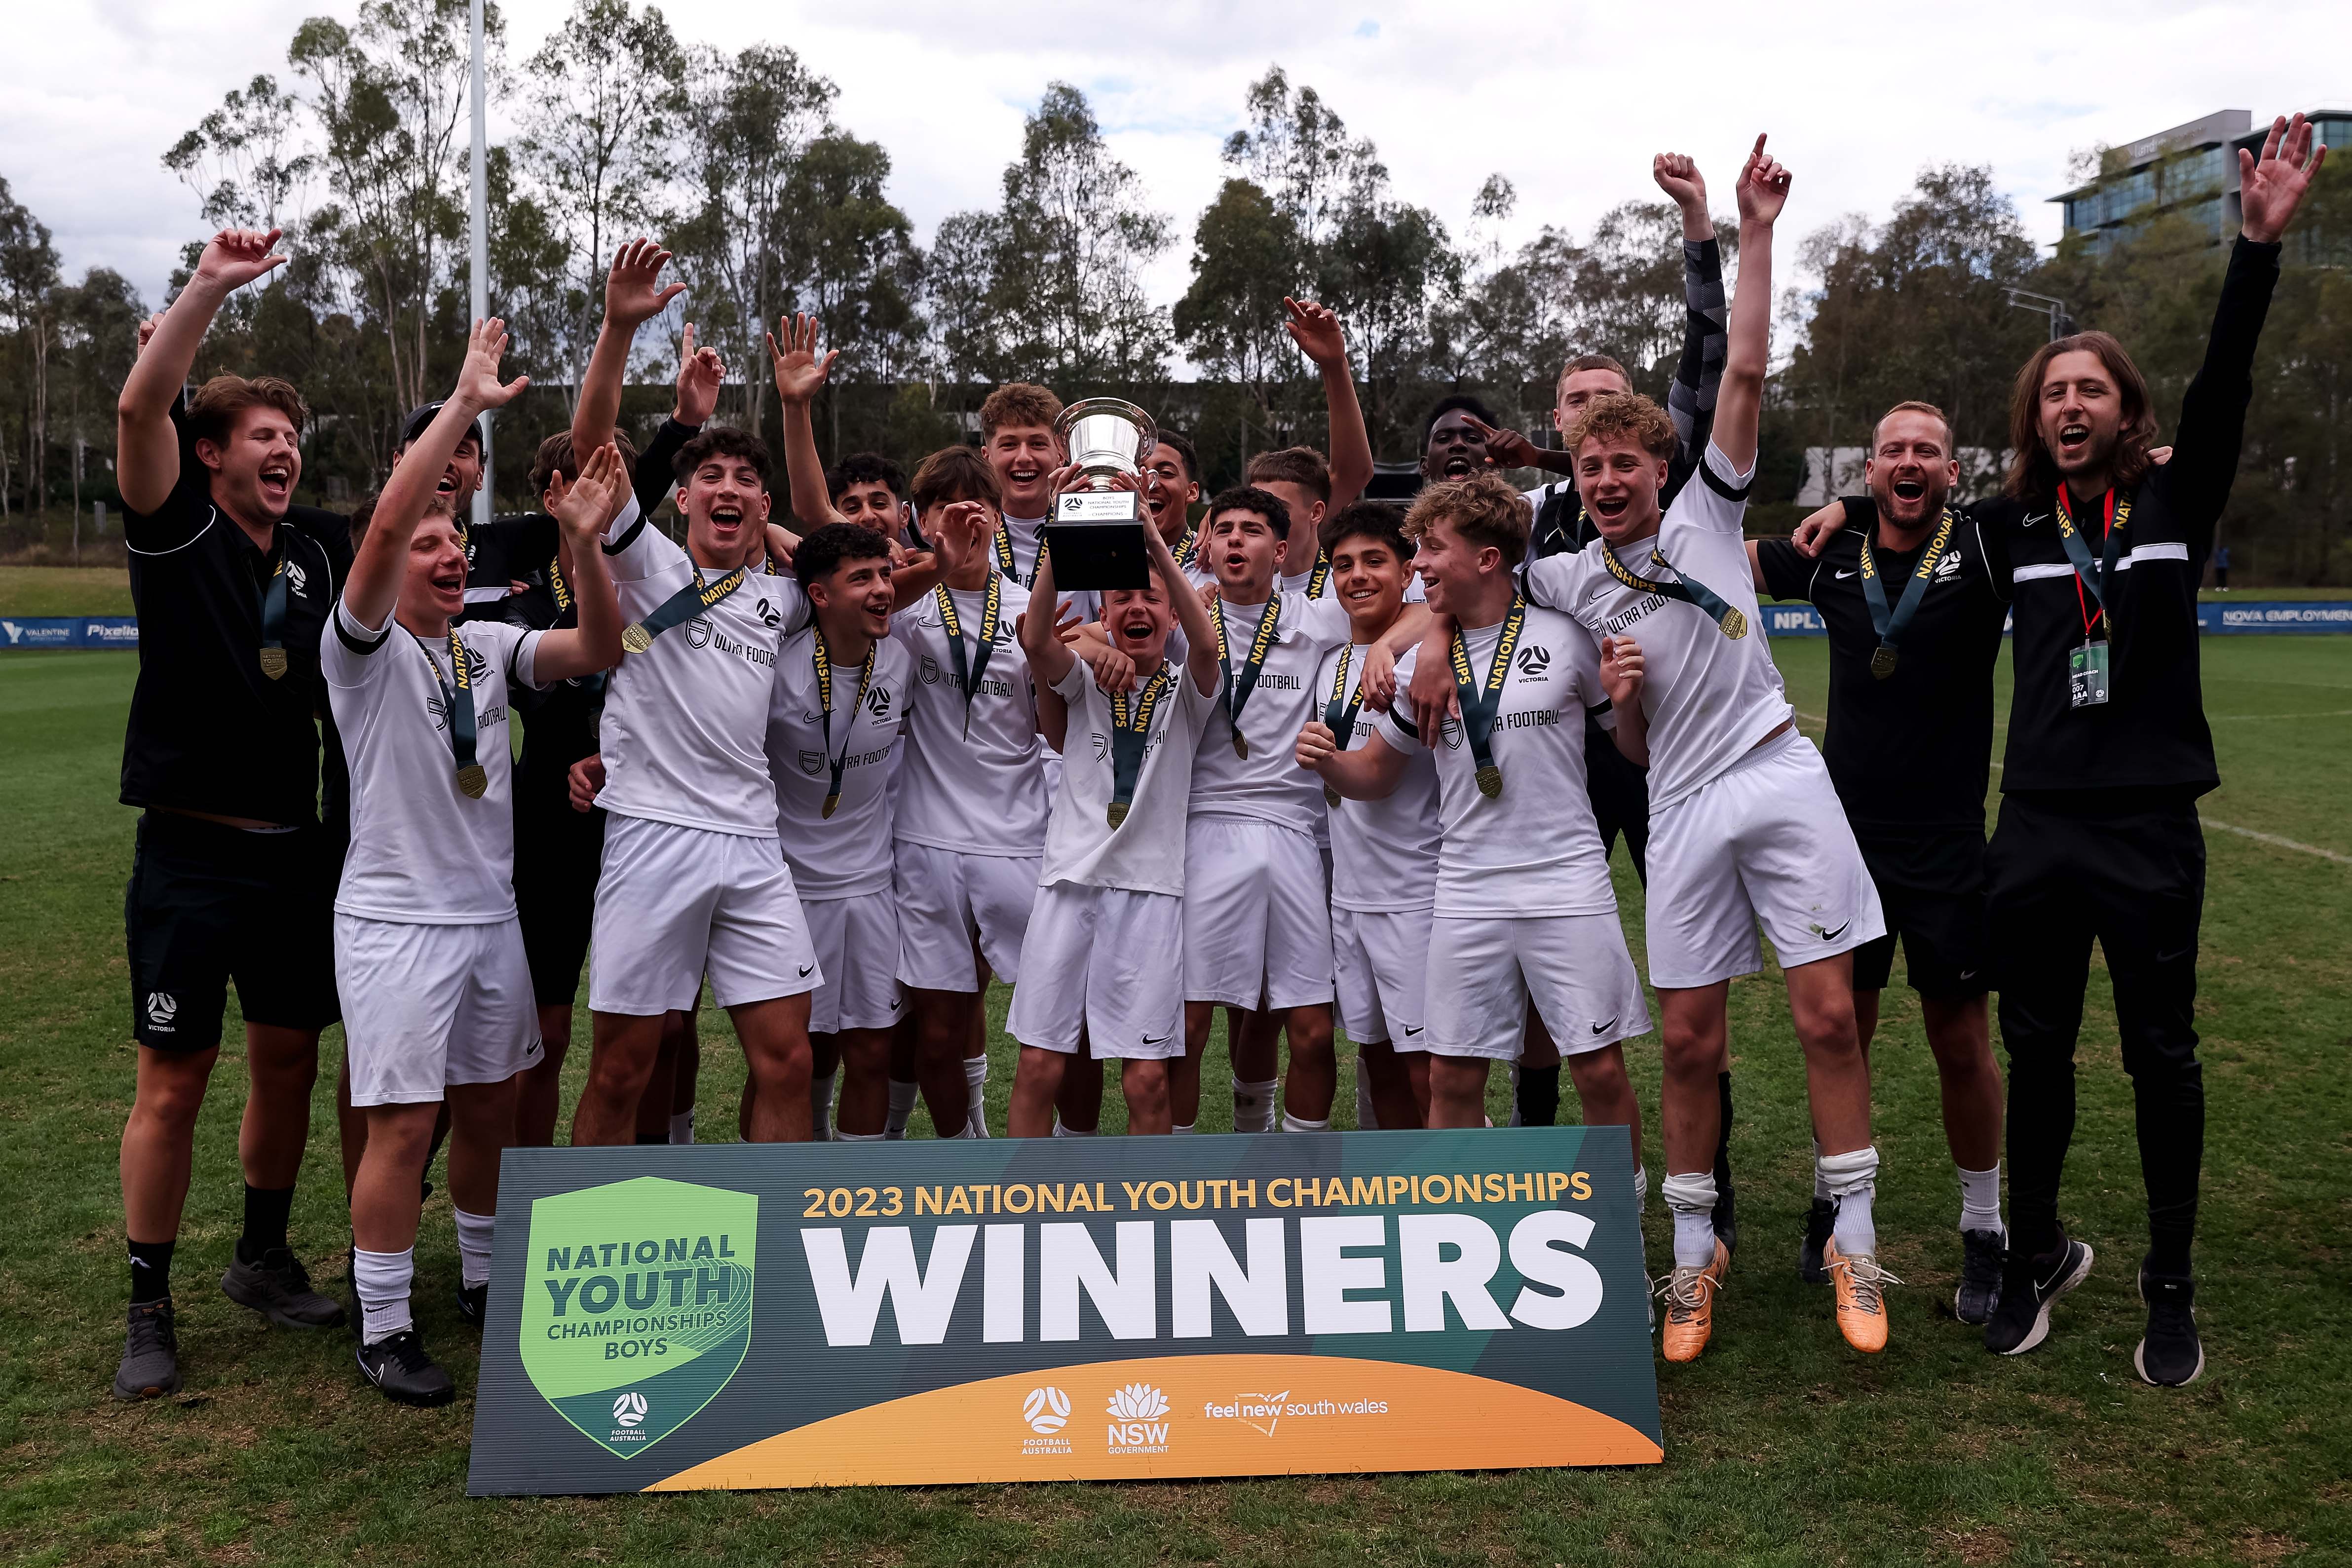 Victoria Blue celebrate after winning the Under 15 National Youth Championships Boys' Tournament 